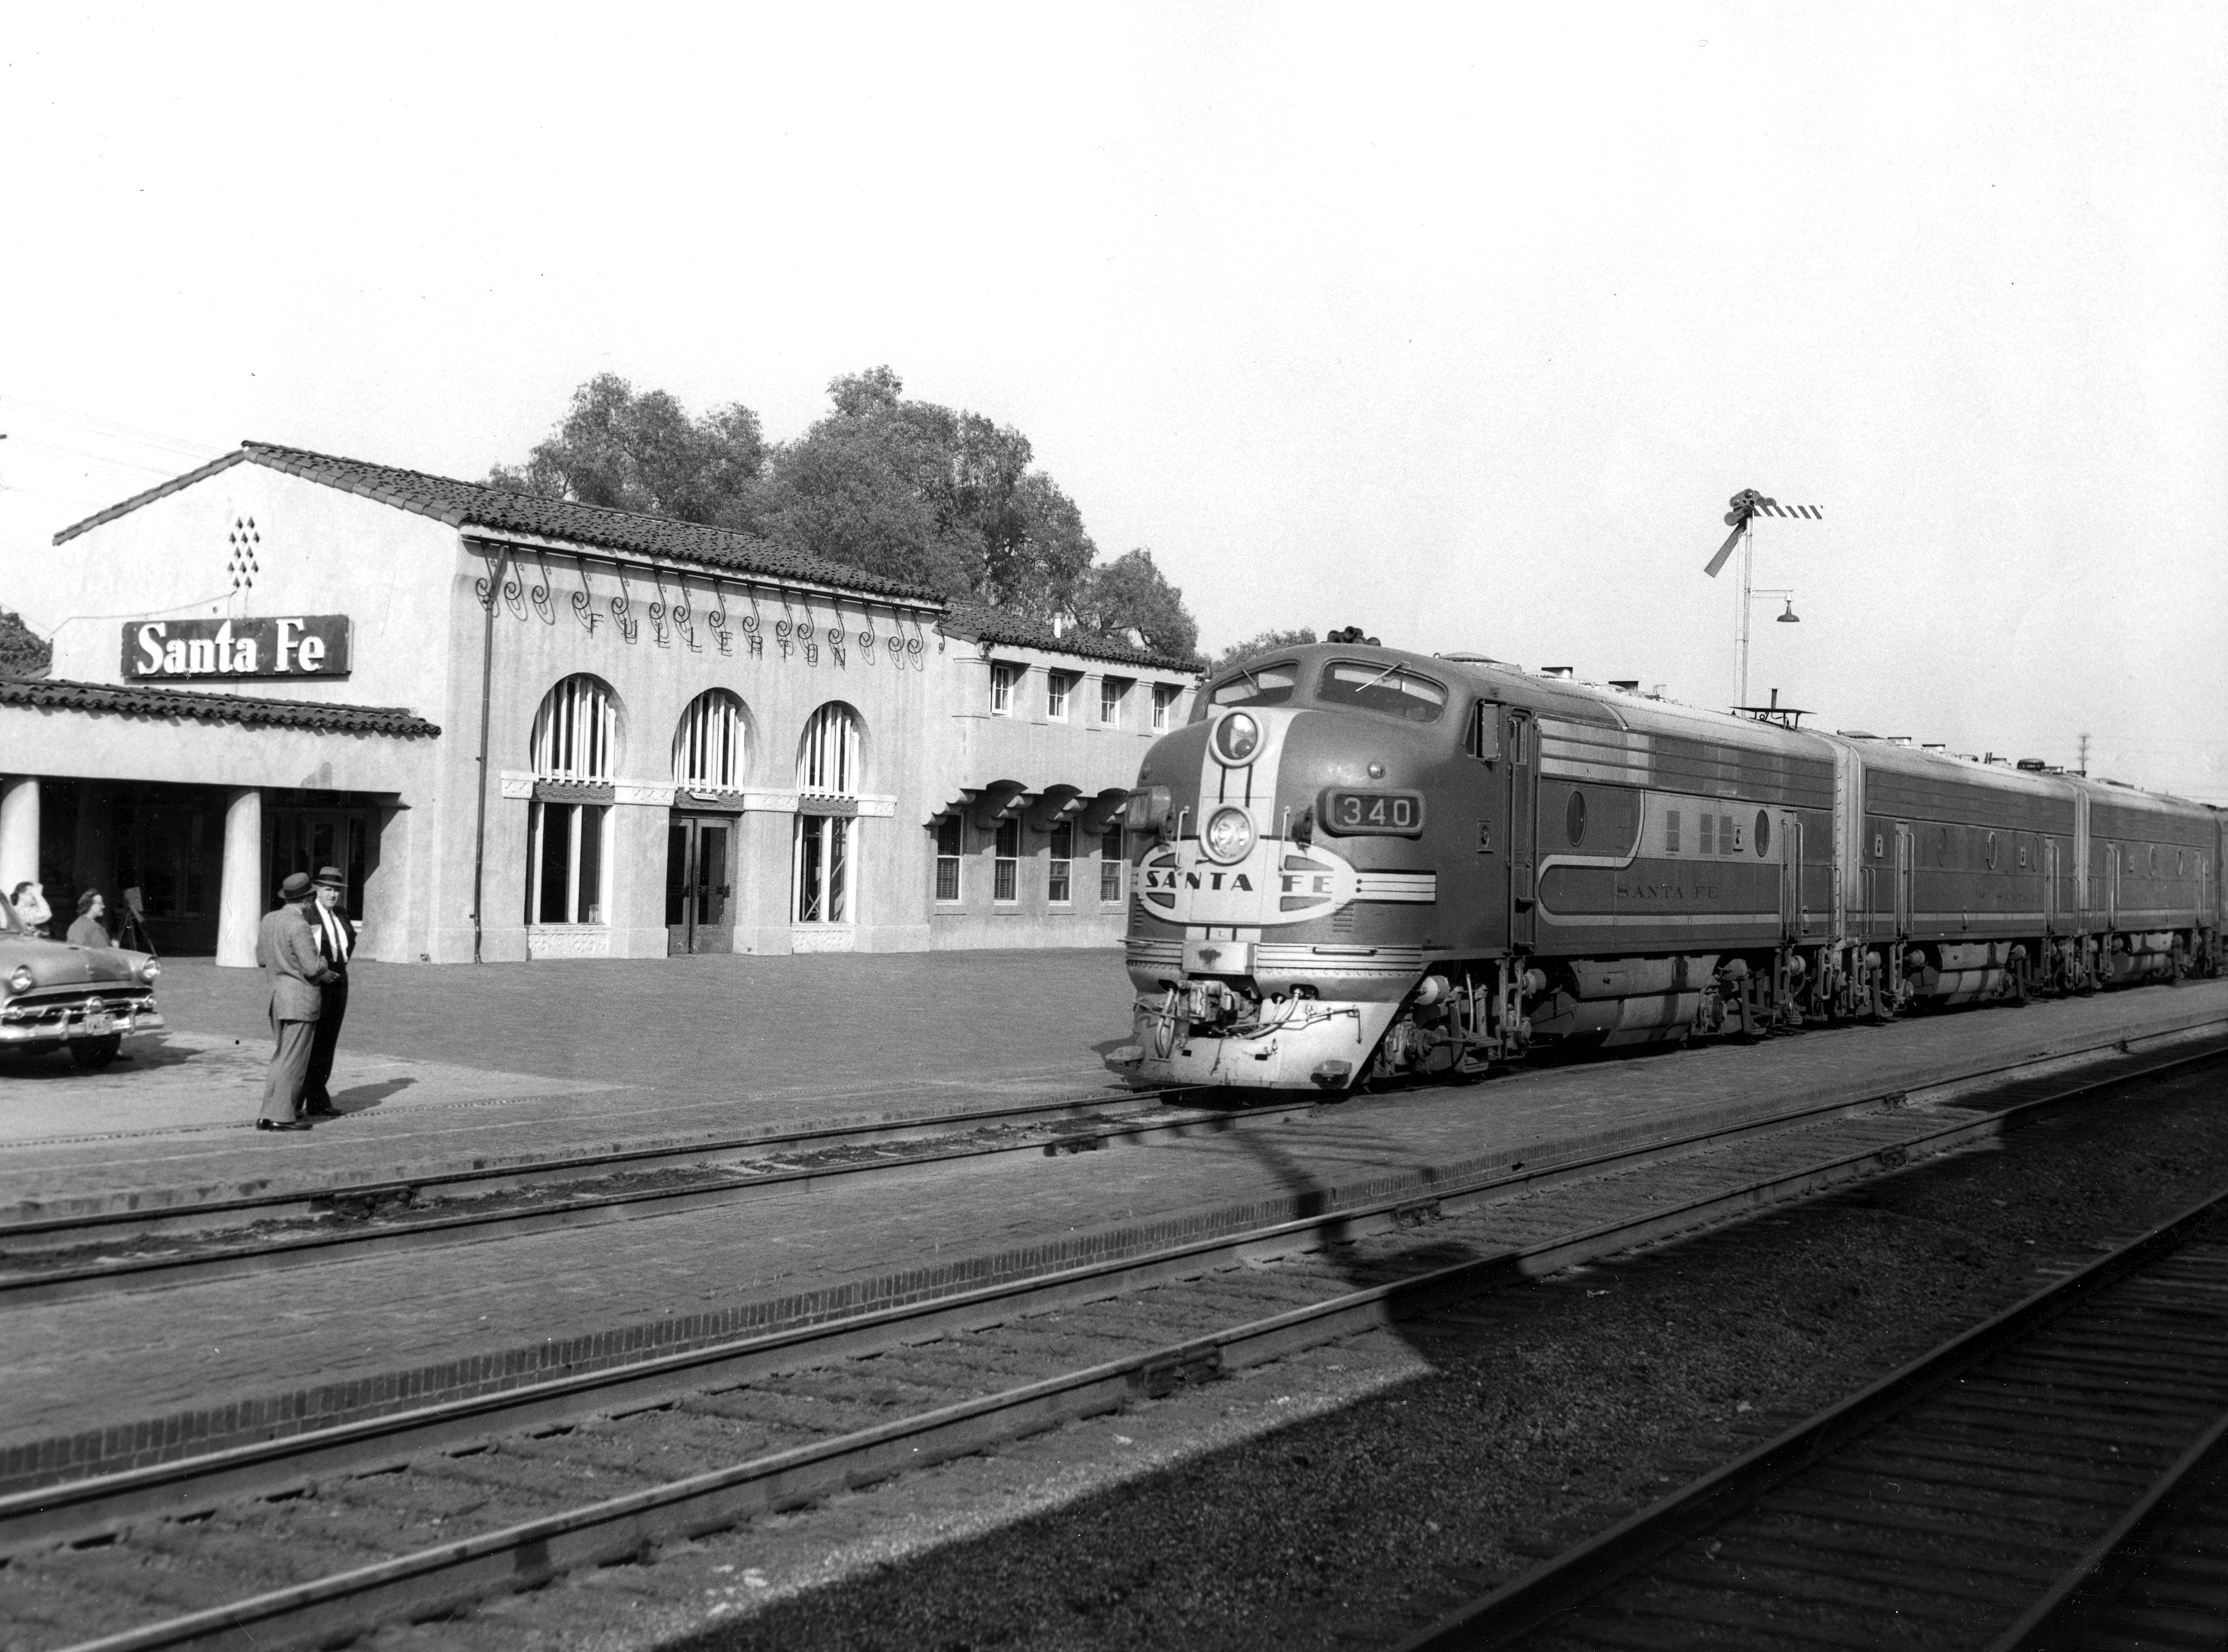 Passenger train pulling in to the Fullerton Santa Fe Depot in 1955, while two men wait on the platform.